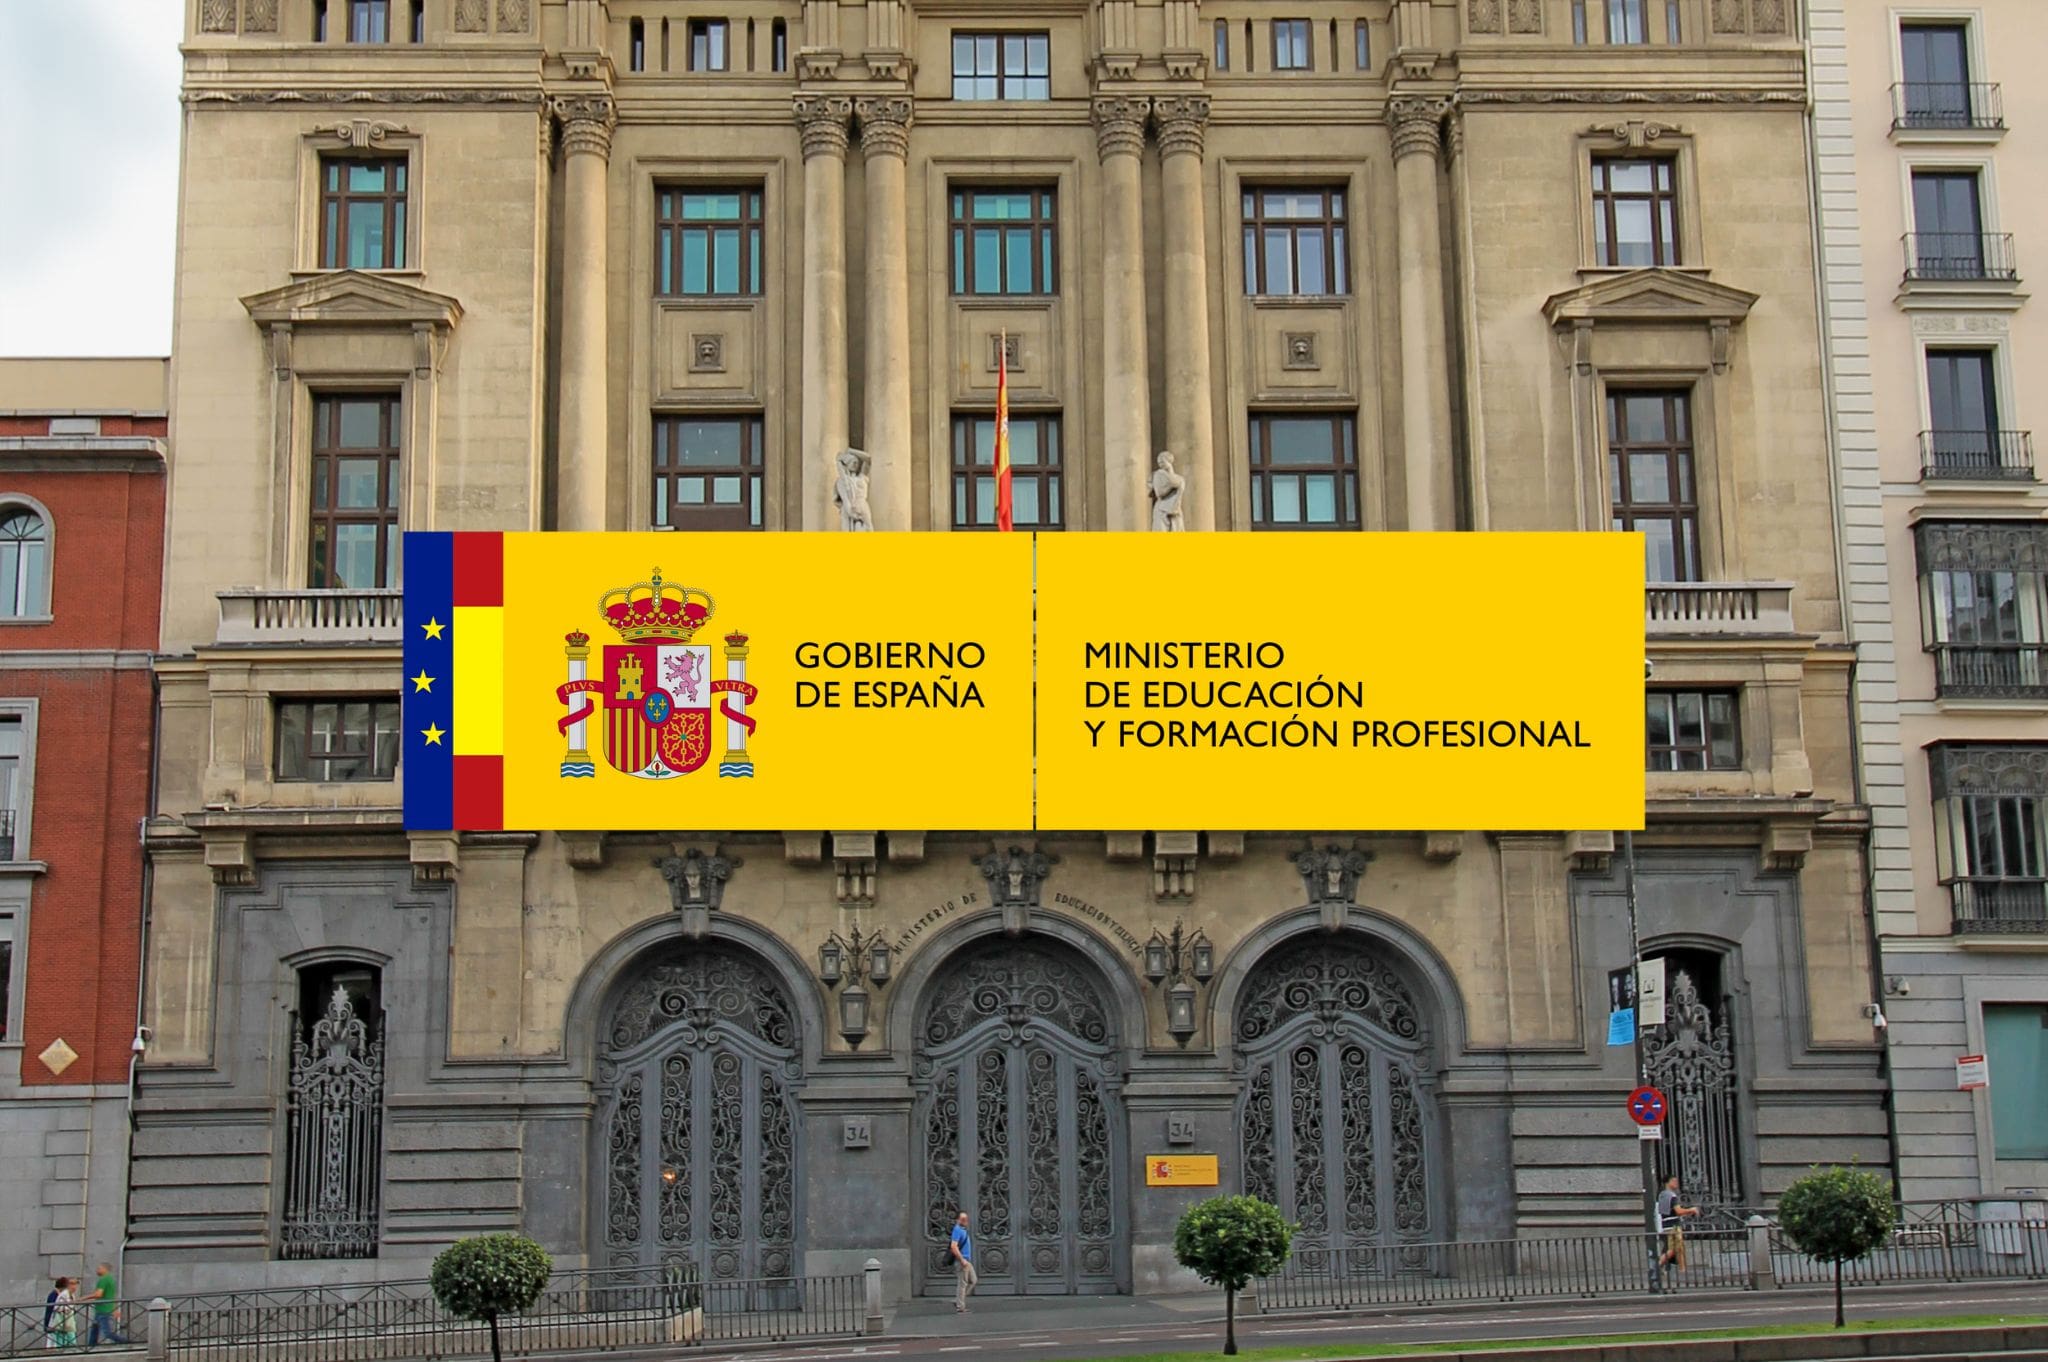 Facade of the Ministry of Education and Vocational Training with the institutional logo superimposed on it